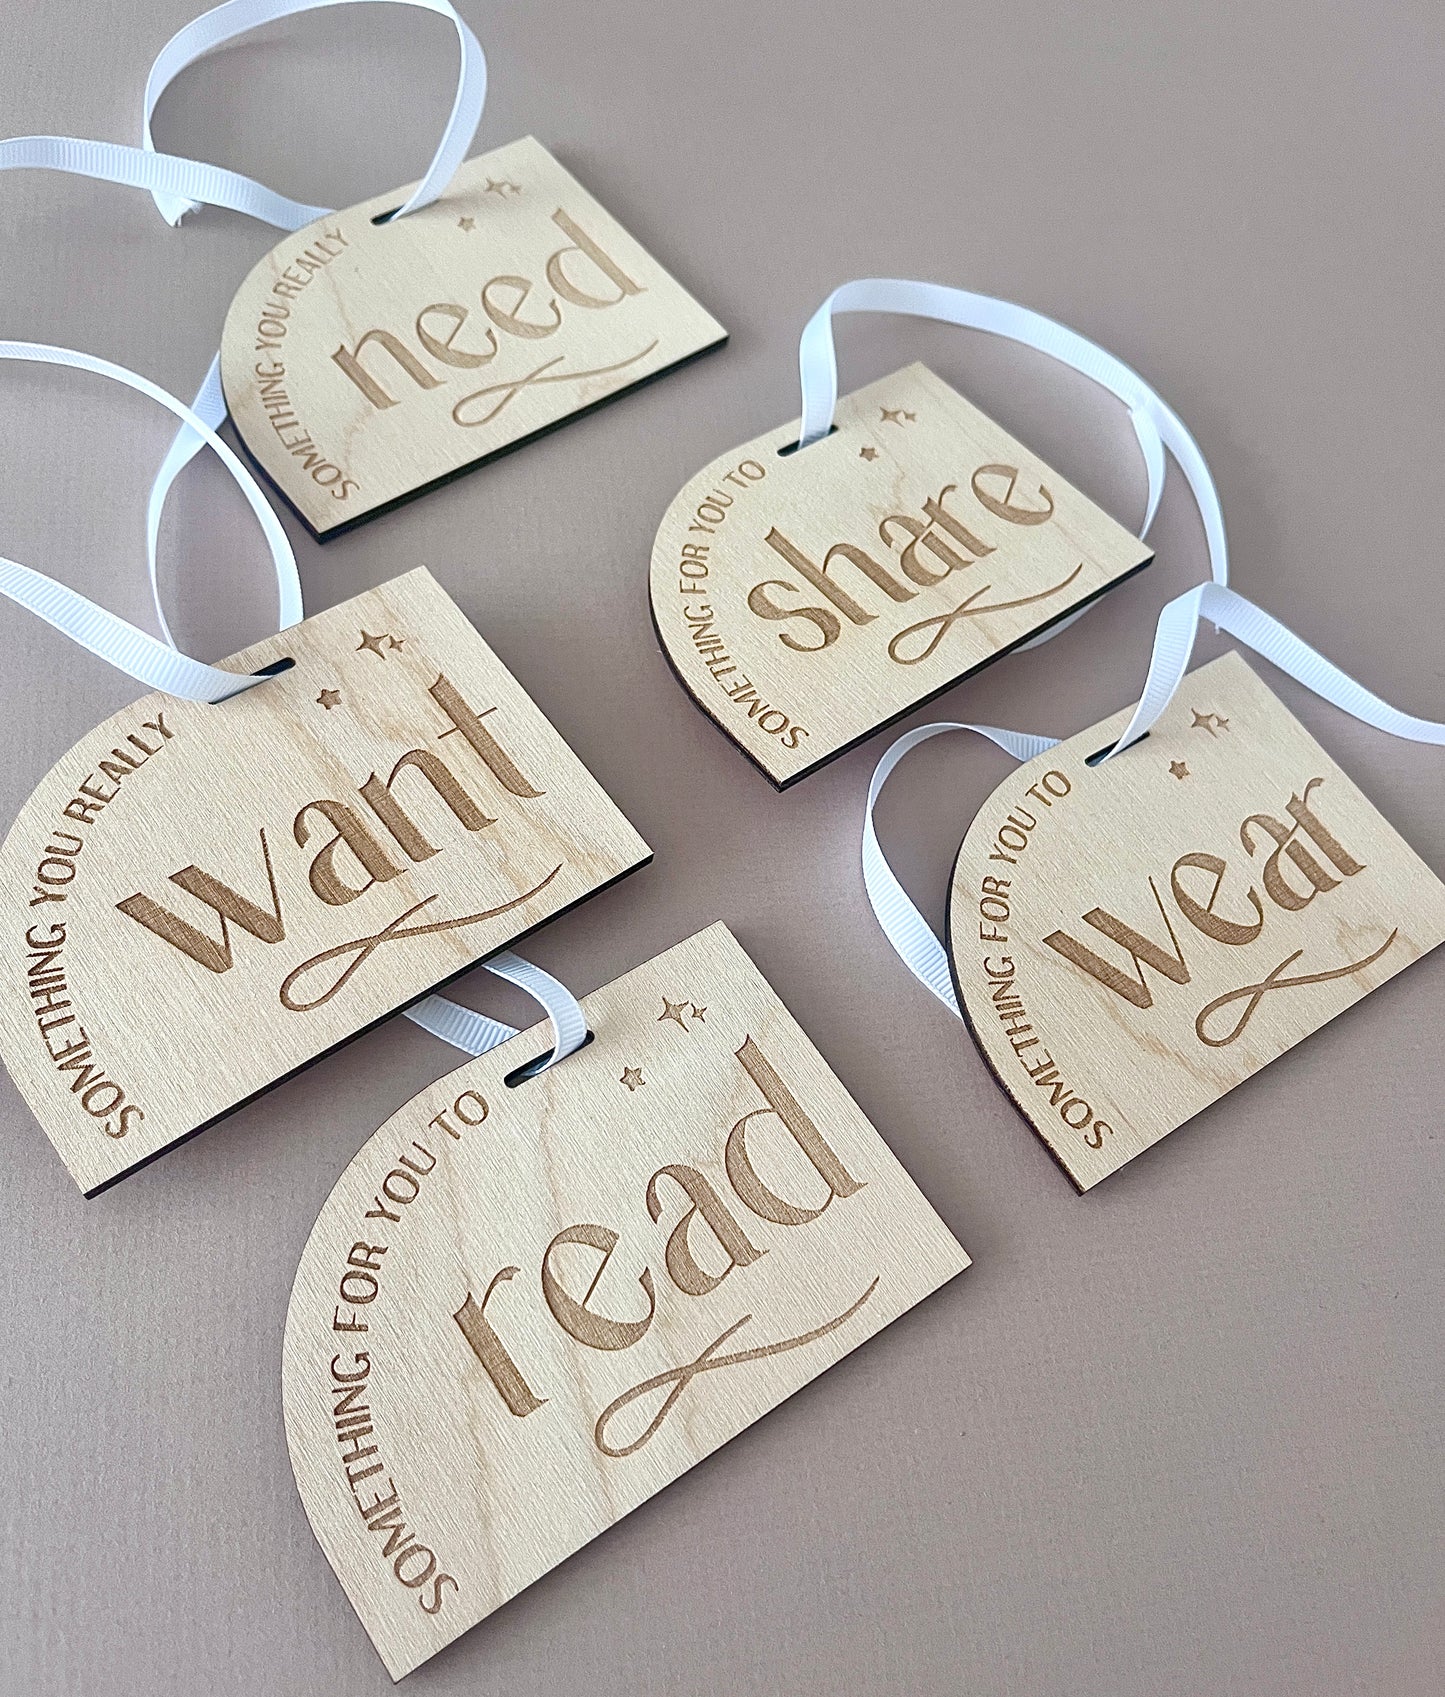 Mindful gift tags